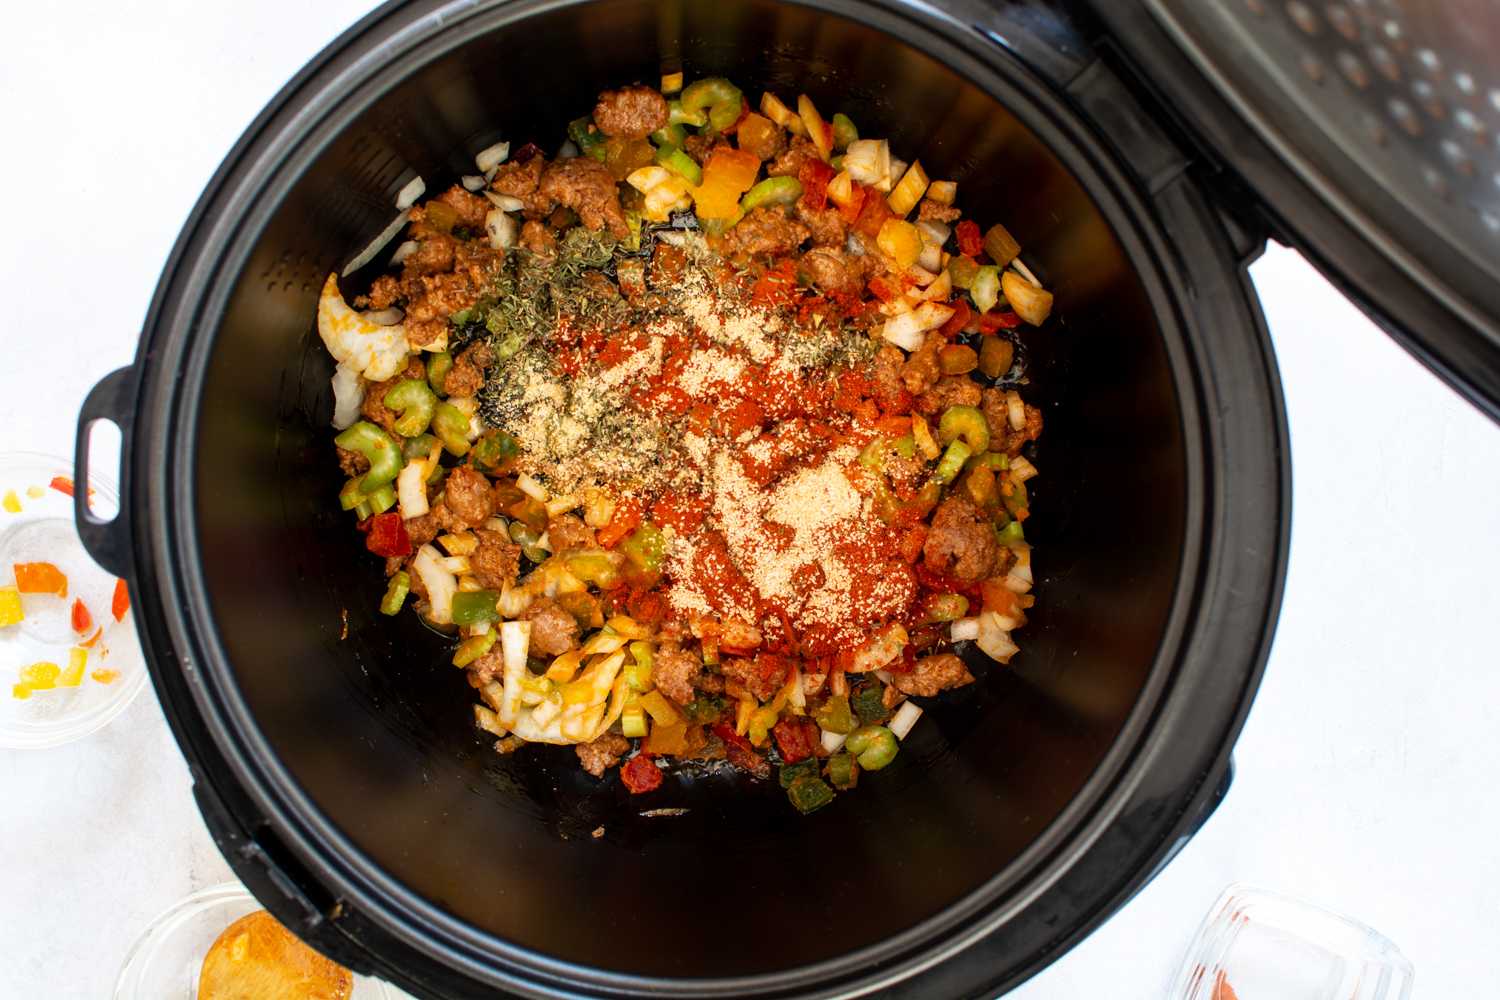 Instant Pot as a Slow Cooker? - DadCooksDinner